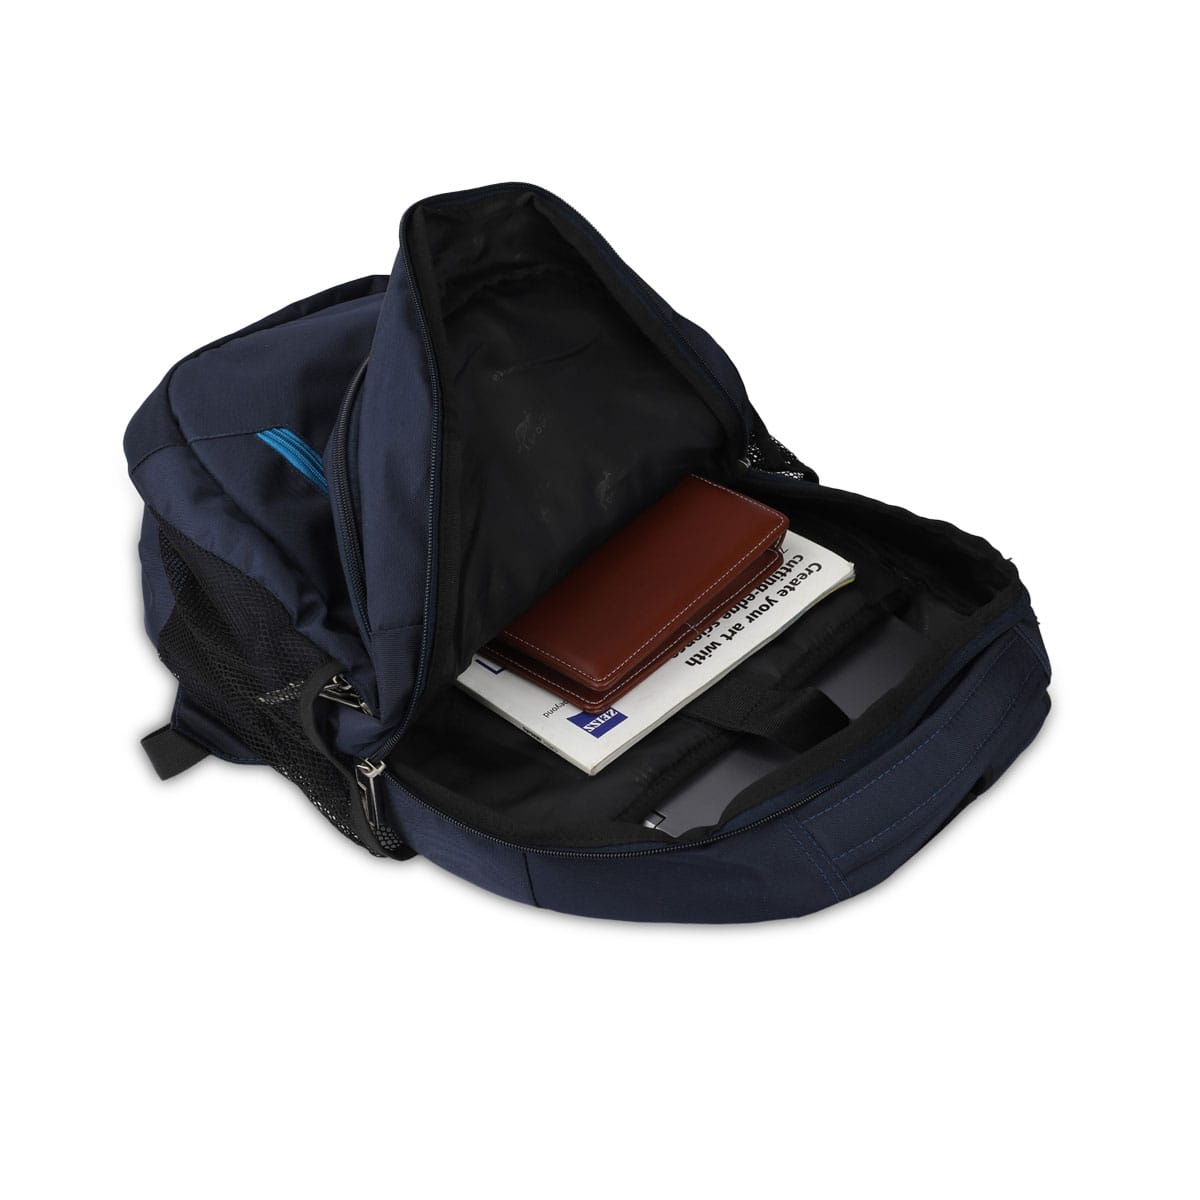 Navy| Protecta Twister Laptop Backpack-5